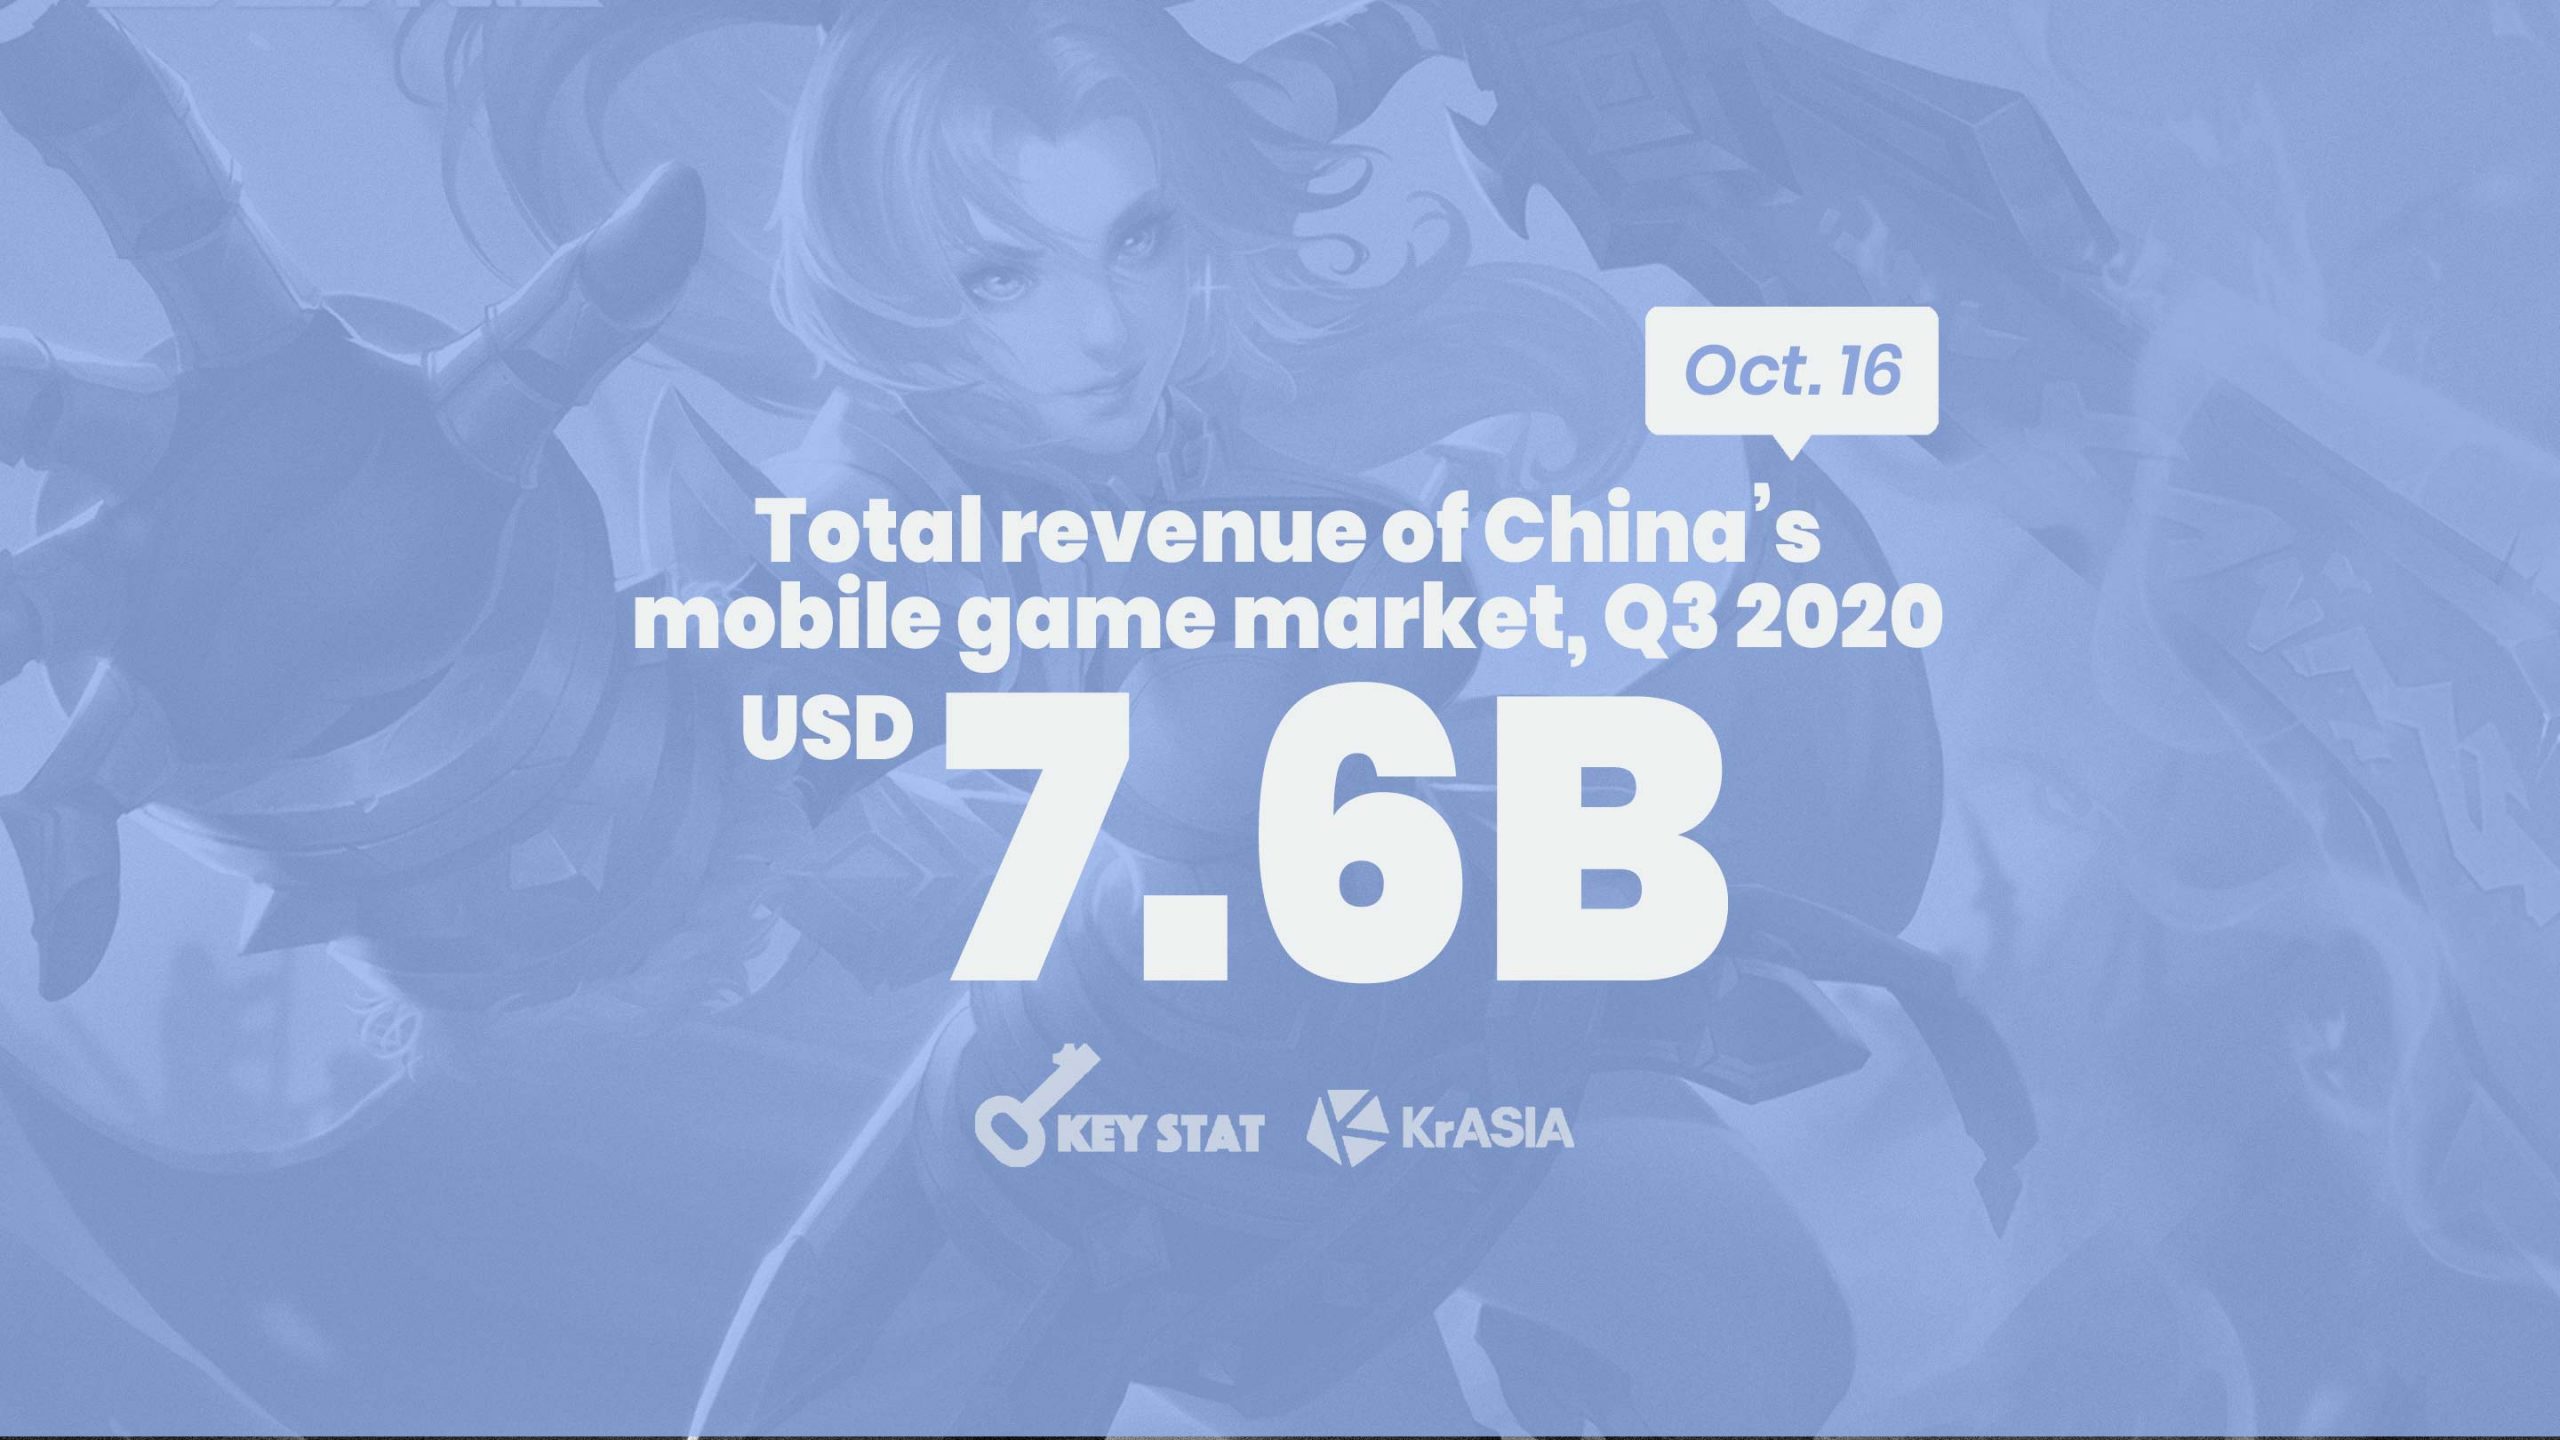 KEY STAT | China’s mobile gaming market observes strong revenue growth despite COVID-19